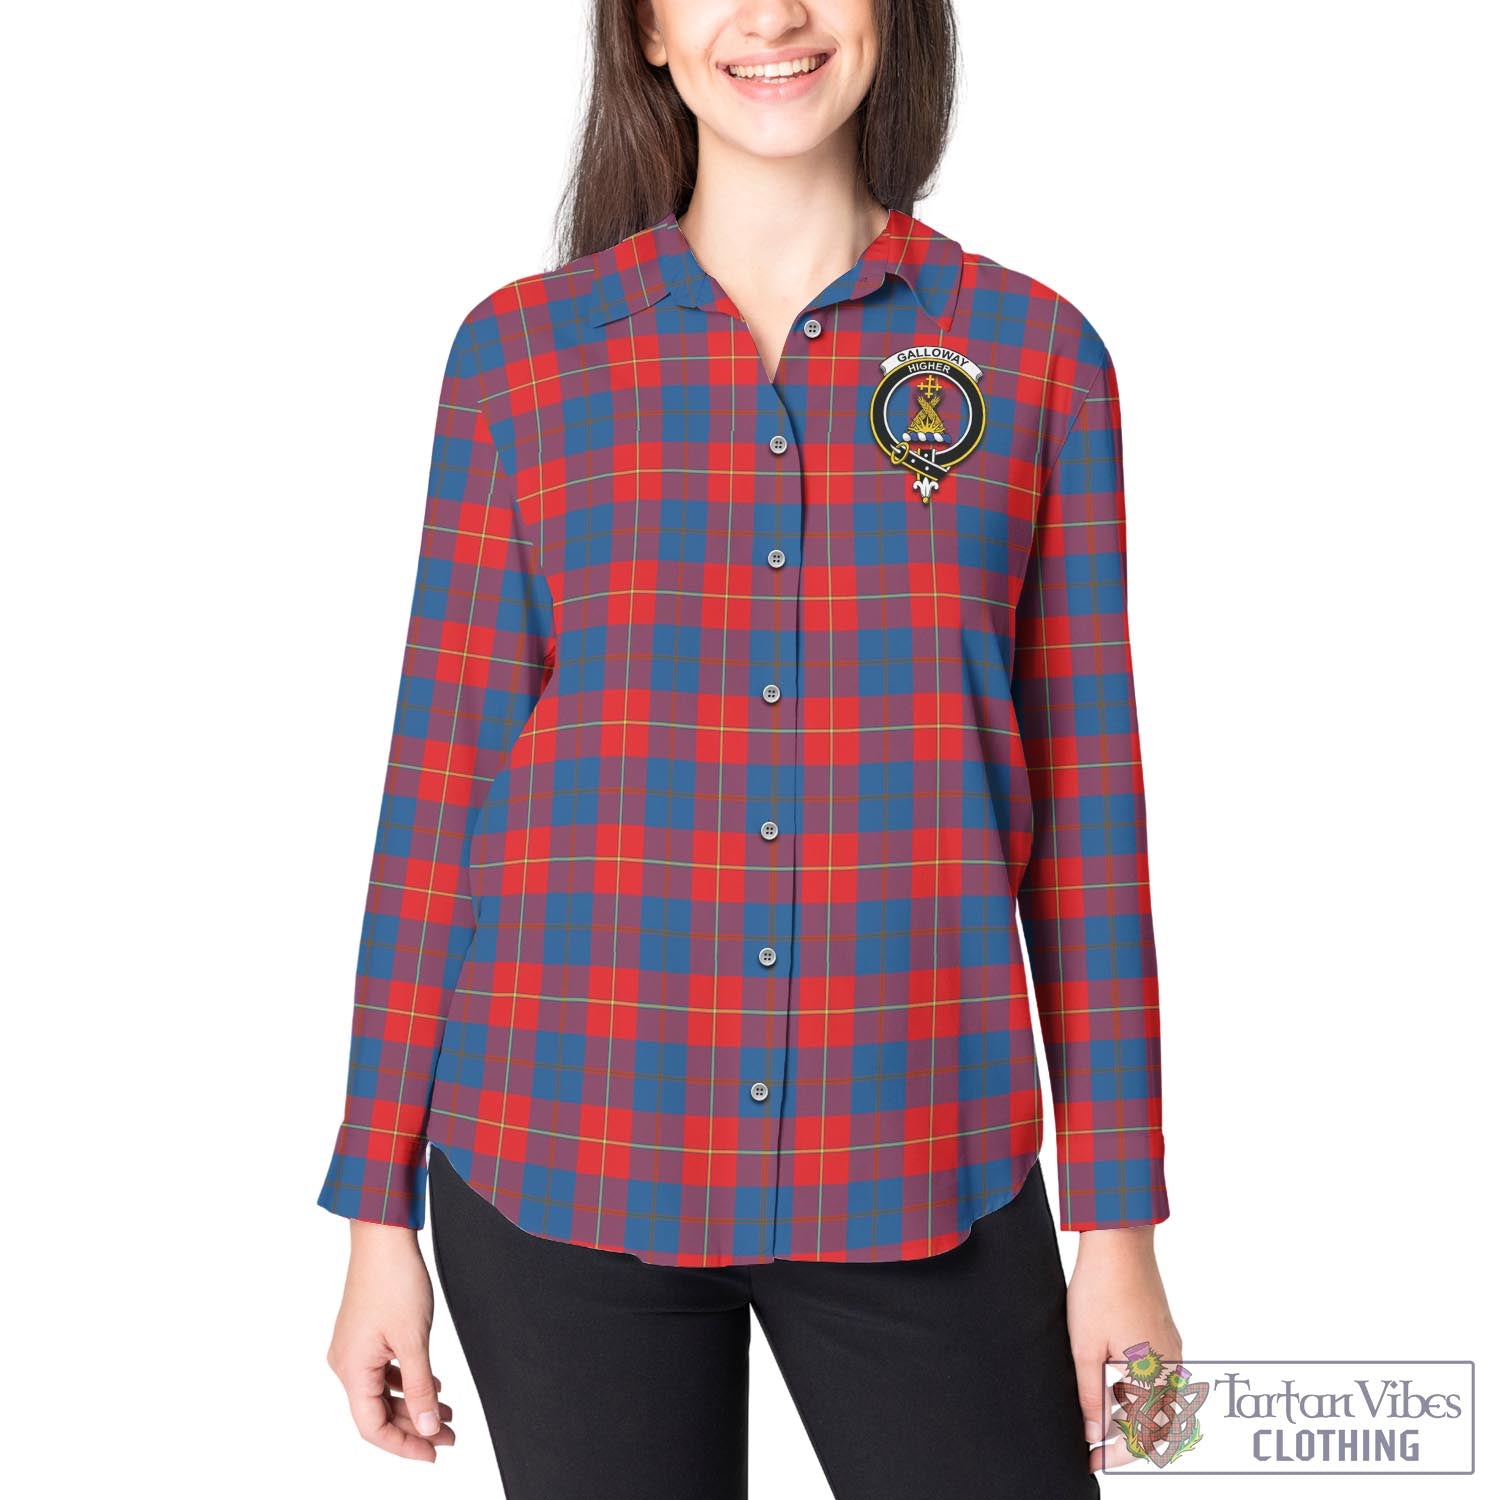 Tartan Vibes Clothing Galloway Red Tartan Womens Casual Shirt with Family Crest